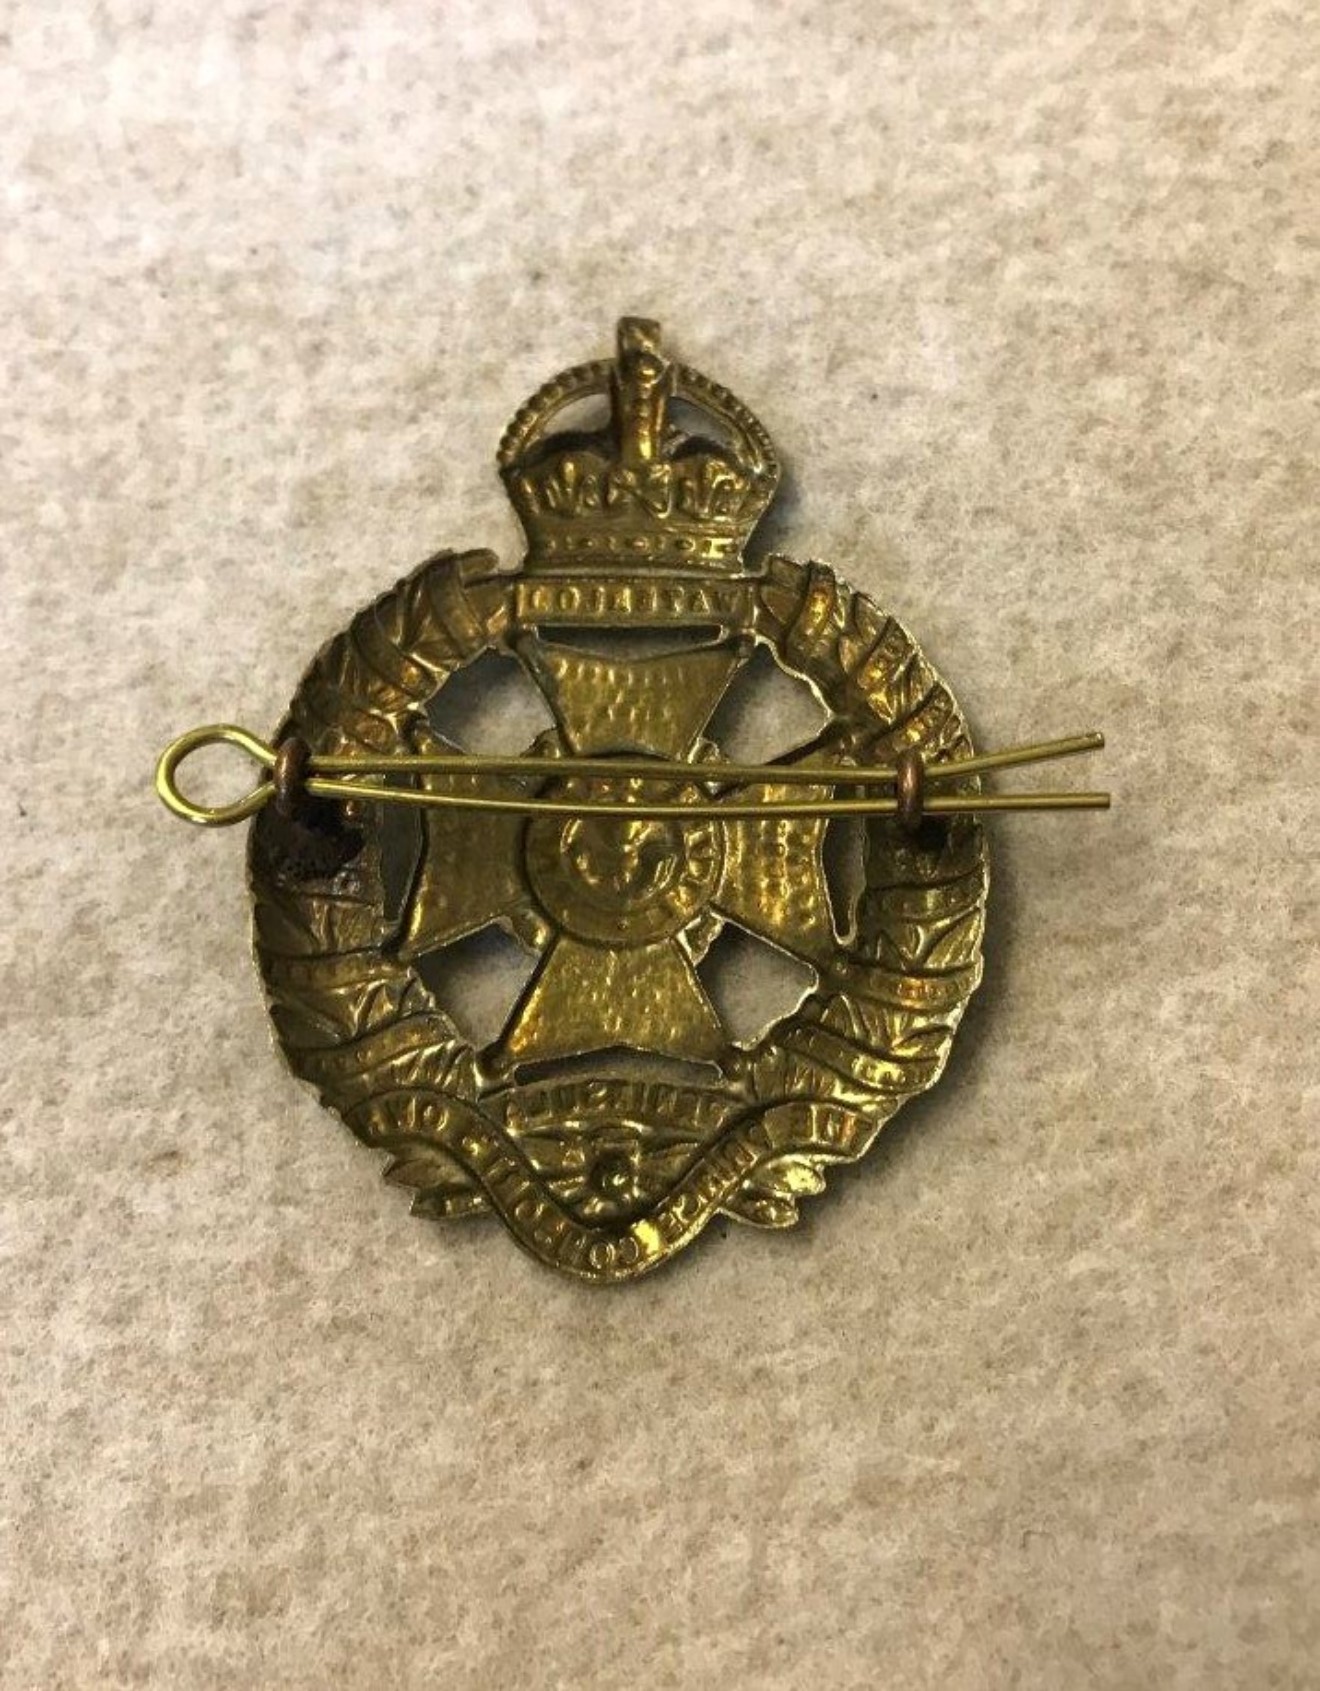 The Prince Consort's Own Rifle Brigade Cap Badge